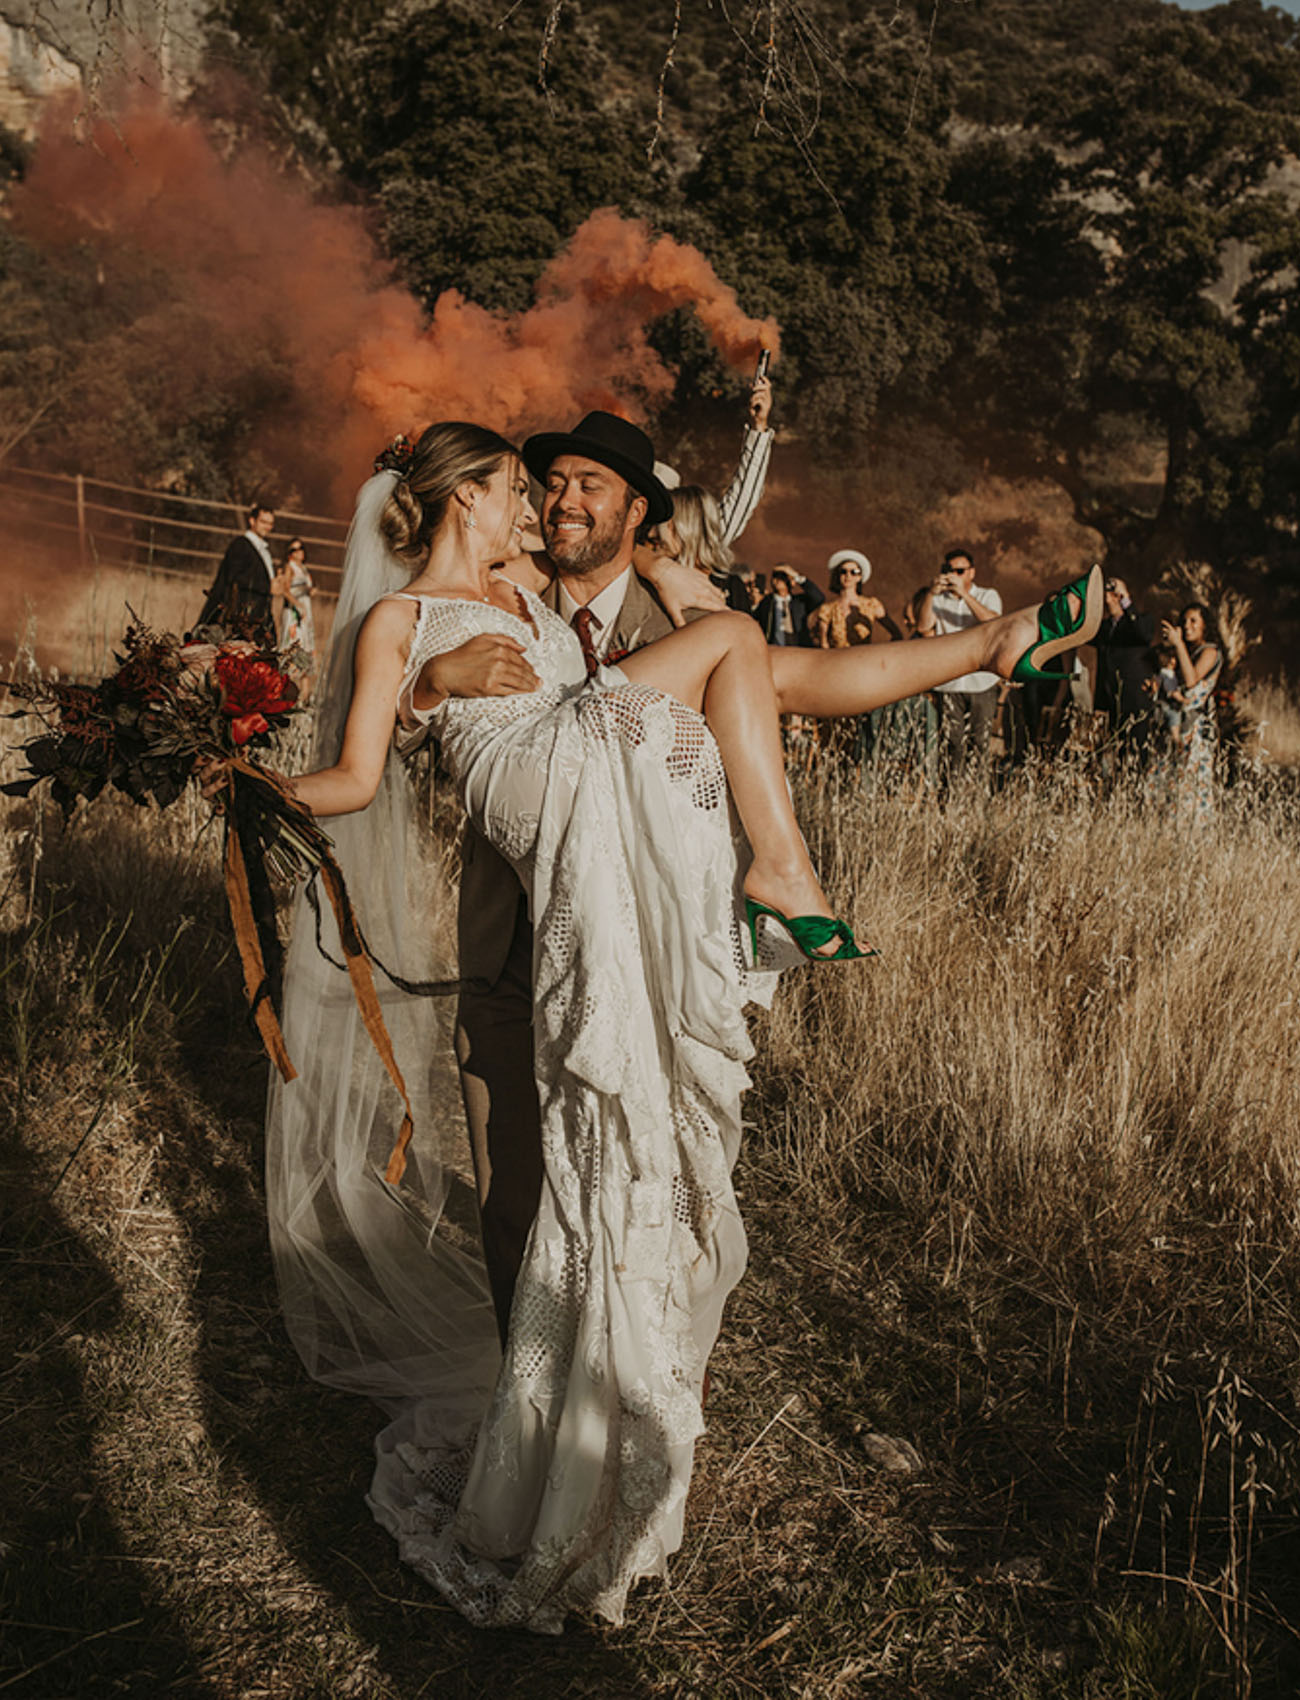 Smoke bombs are amazing for the wedding exit, and look at the gorgeous green wedding shoes